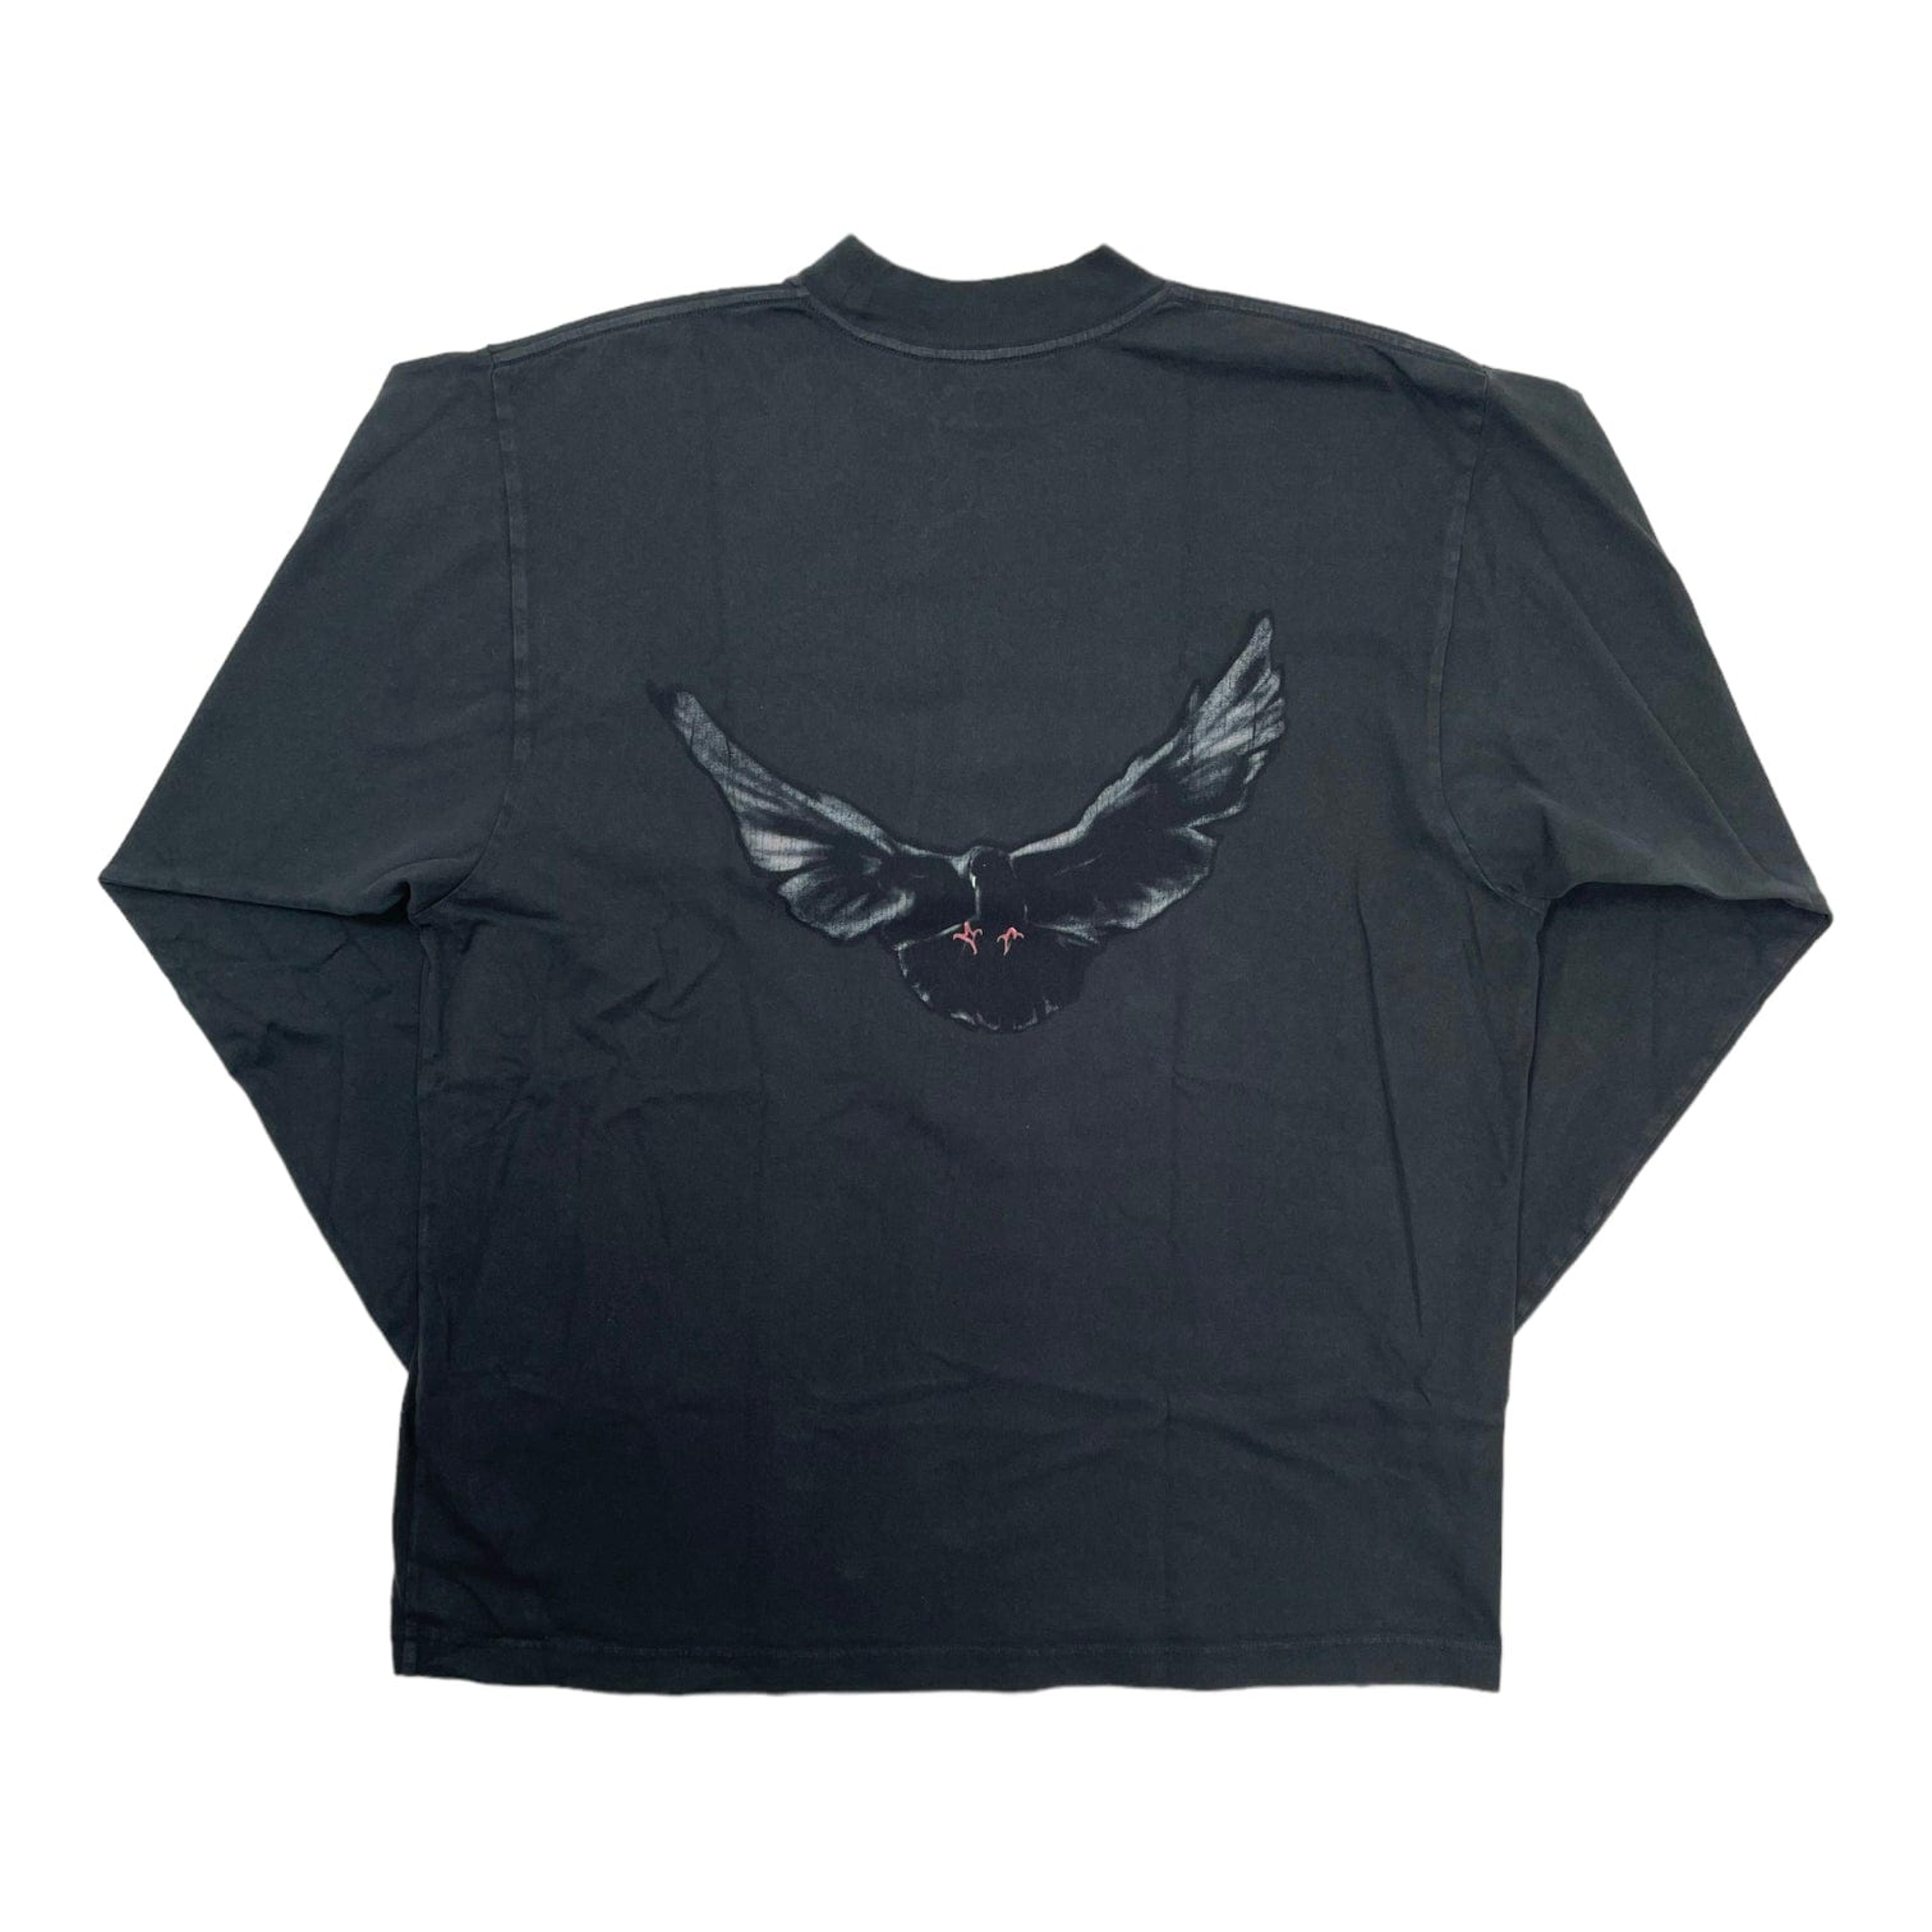 Yeezy Gap Dove Long Sleeve Tee Shirt Washed Black Pre-Owned